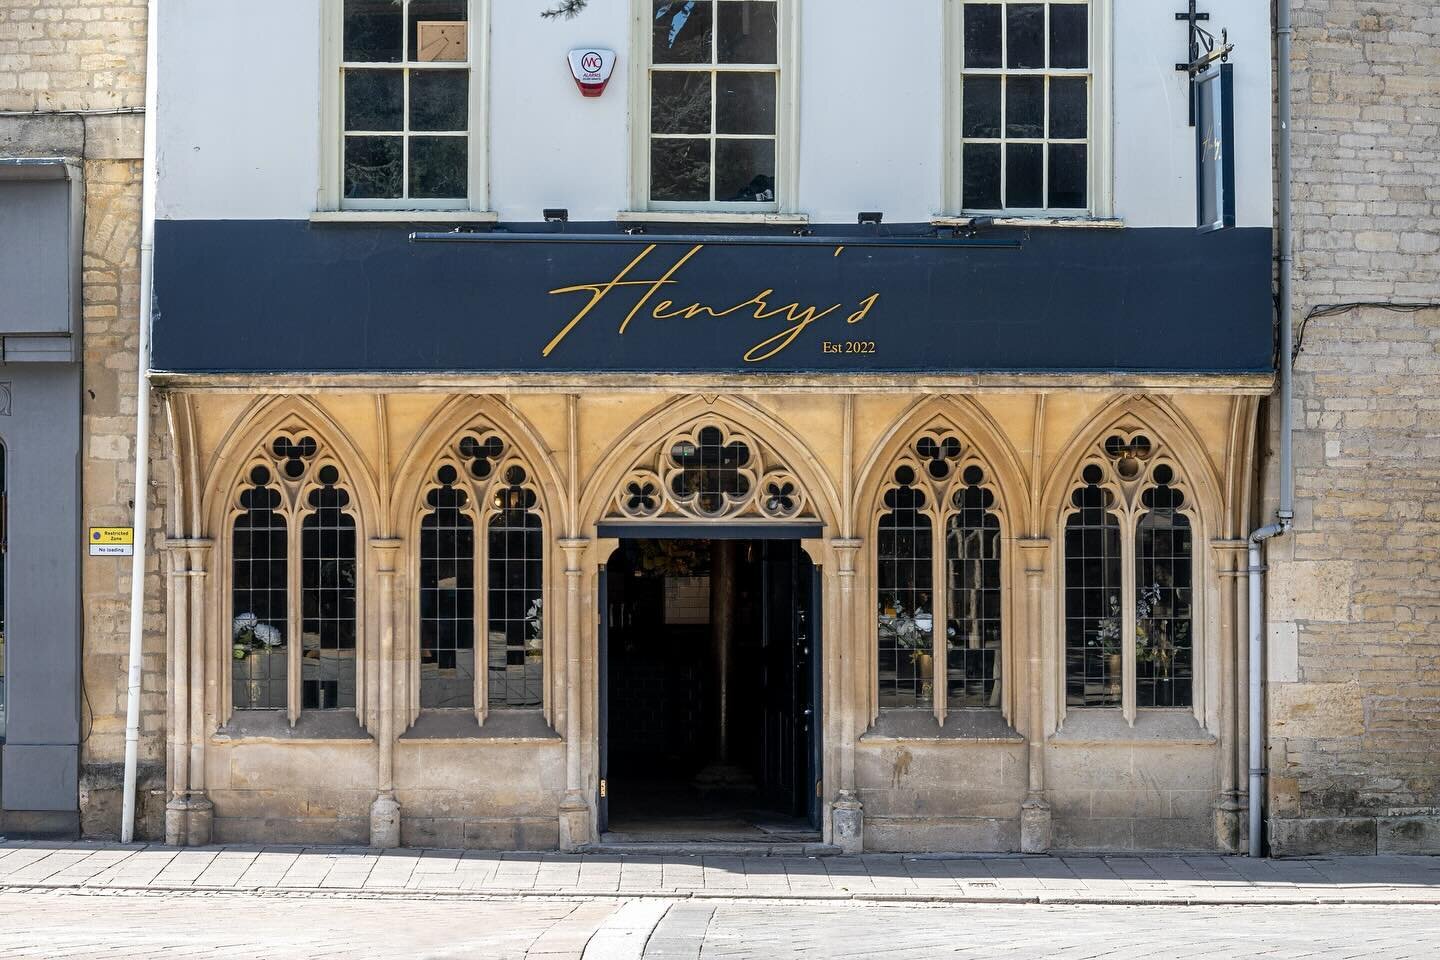 One of our top recommendations to guests - Henry&rsquo;s Seafood Bar and Grill in Cirencester. 
Fab cocktails, delicious food and a buzzing vibe perfect for brunch or dinner including alfresco courtyard dinning. Only 10 mins from The Lodge. 
If you f